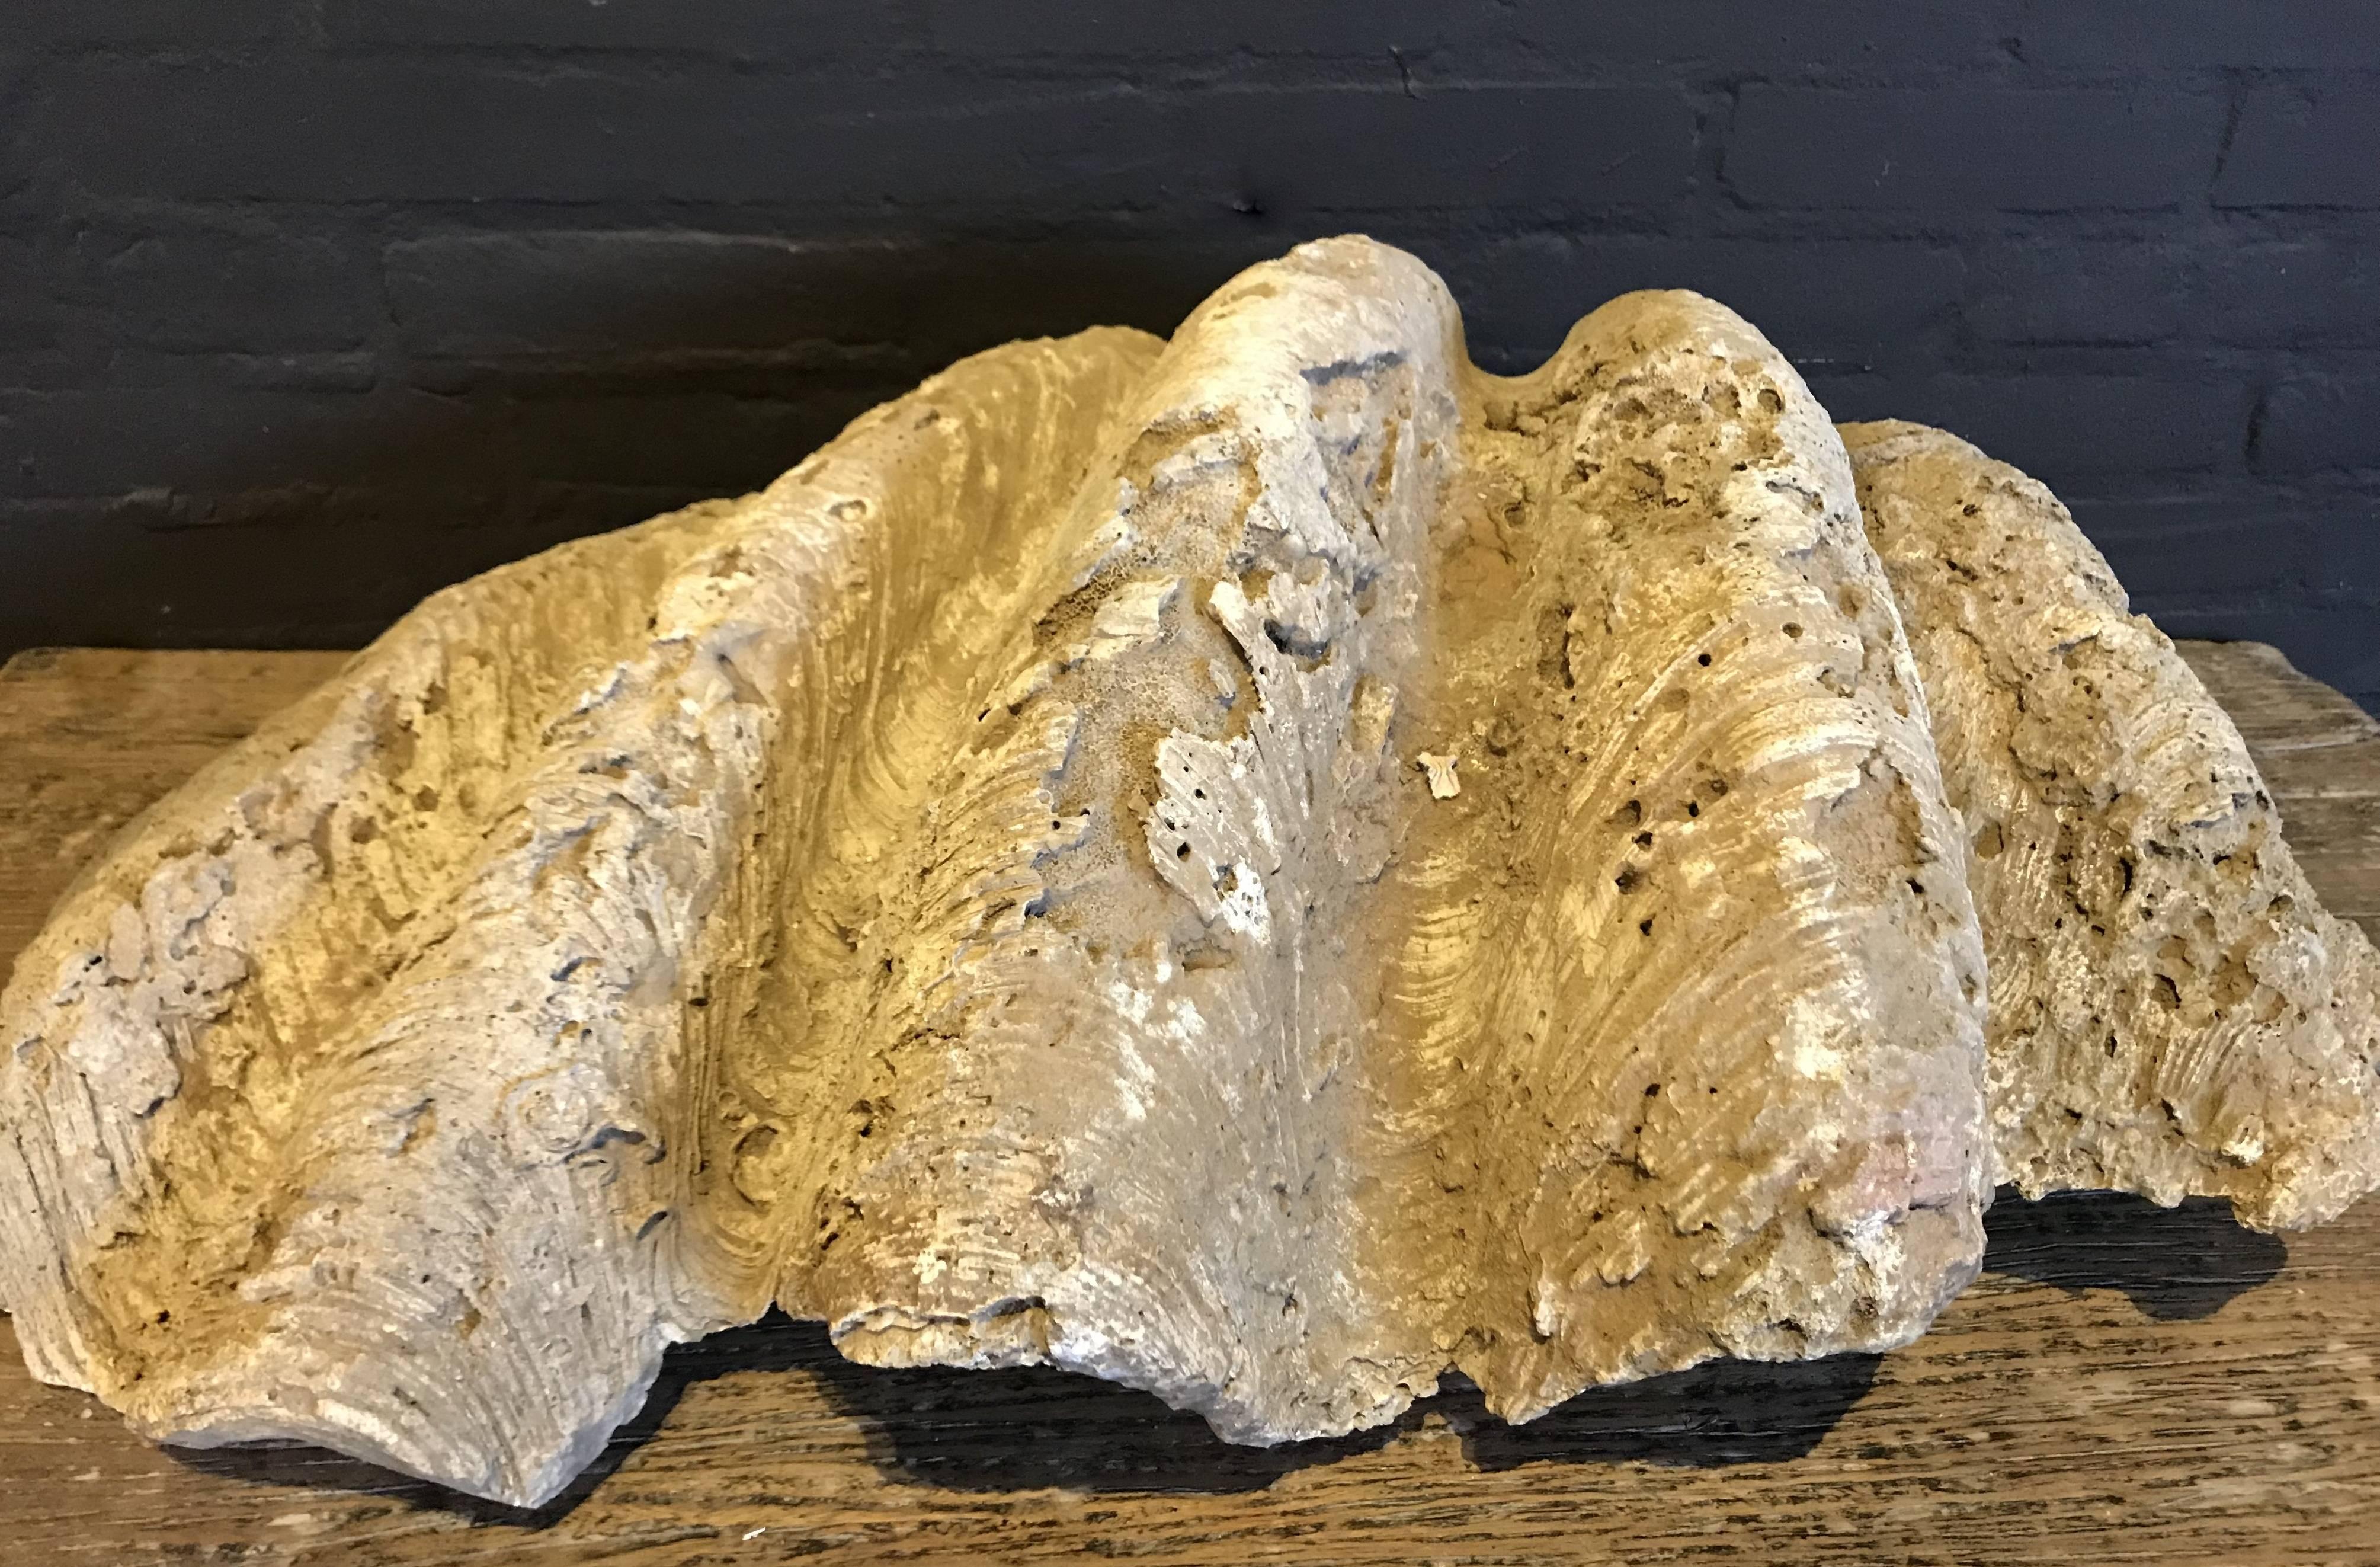 Philippine Fossil, Giant Clam 'Tridacna Gigas' For Sale